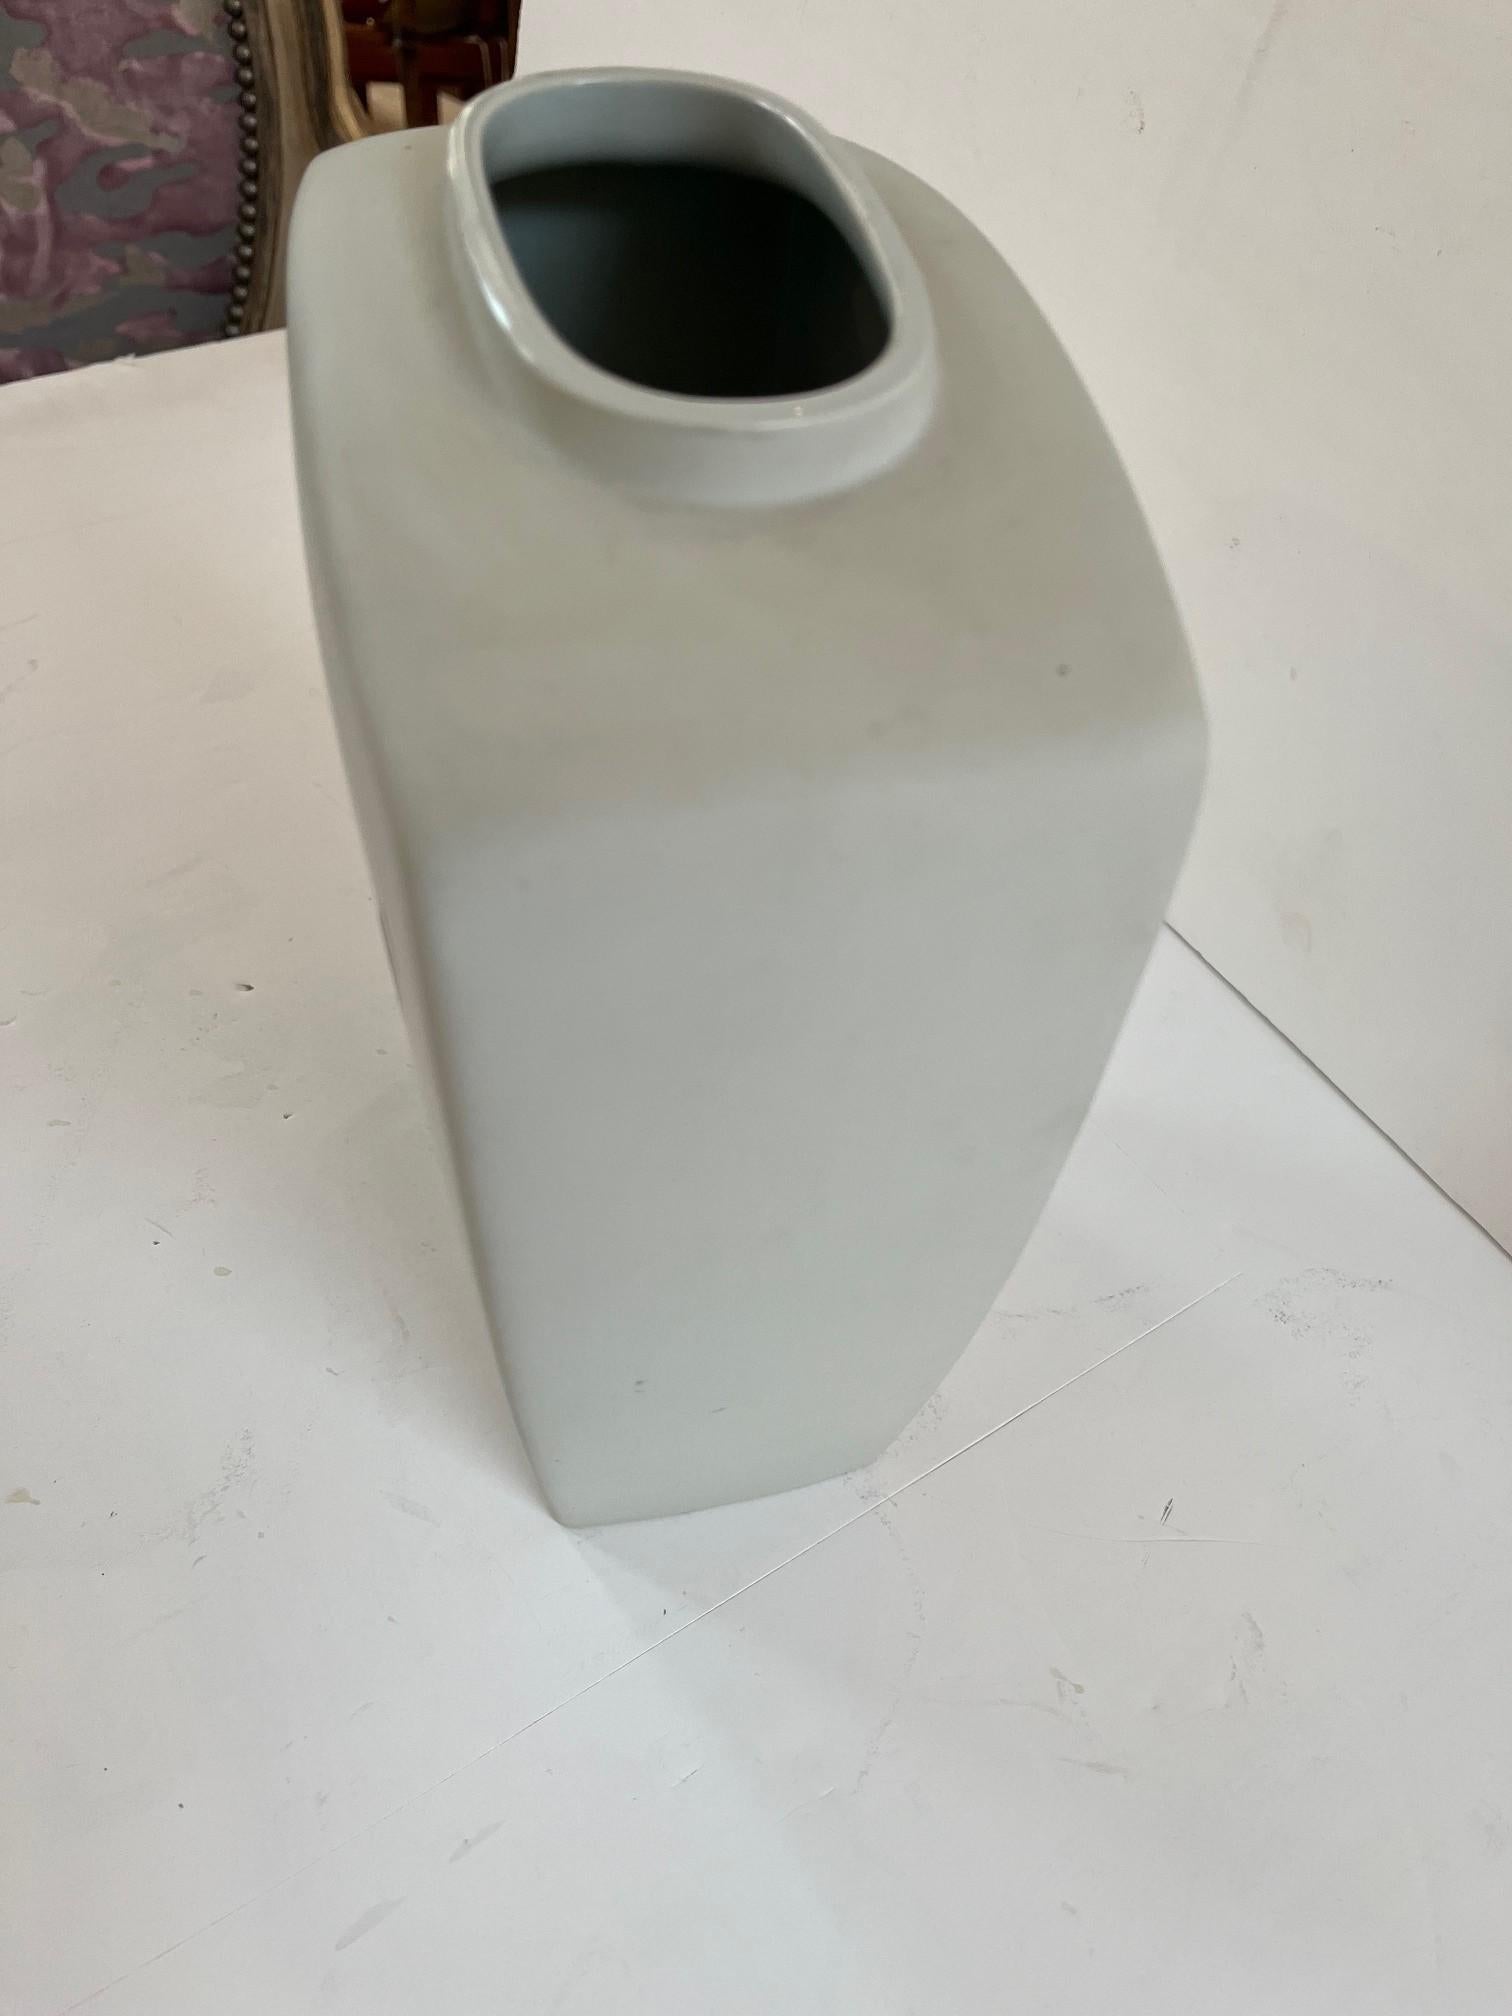 Mid-20th Century Vintage Exquisite Art Deco White Ceramic Vase by Rena Rosenthal For Sale